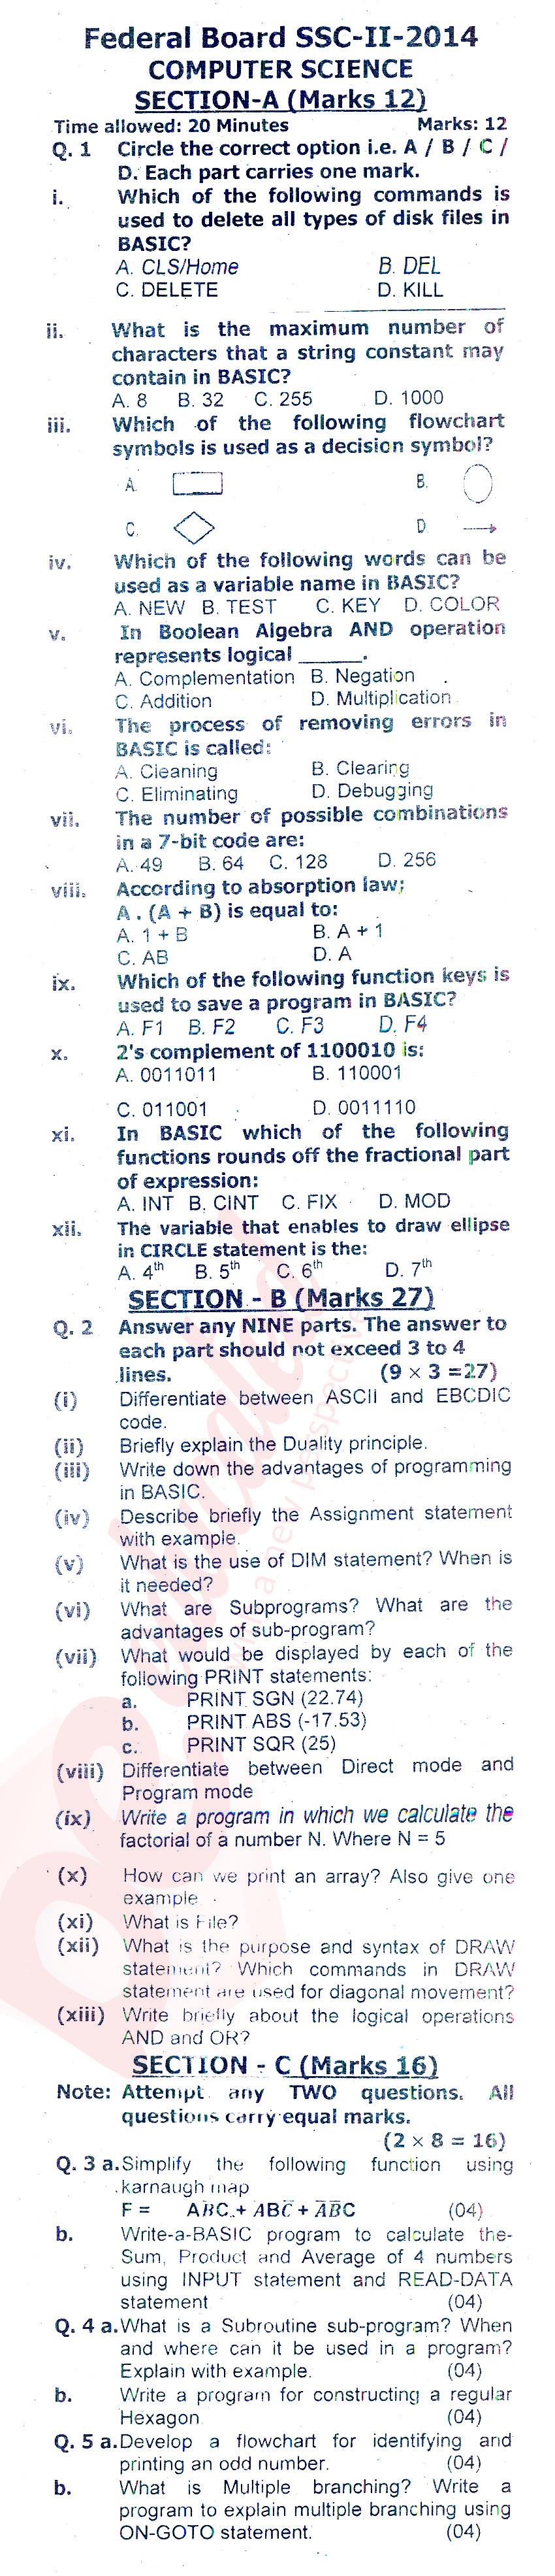 Computer Science 10th class Past Paper Group 1 Federal BISE  2014